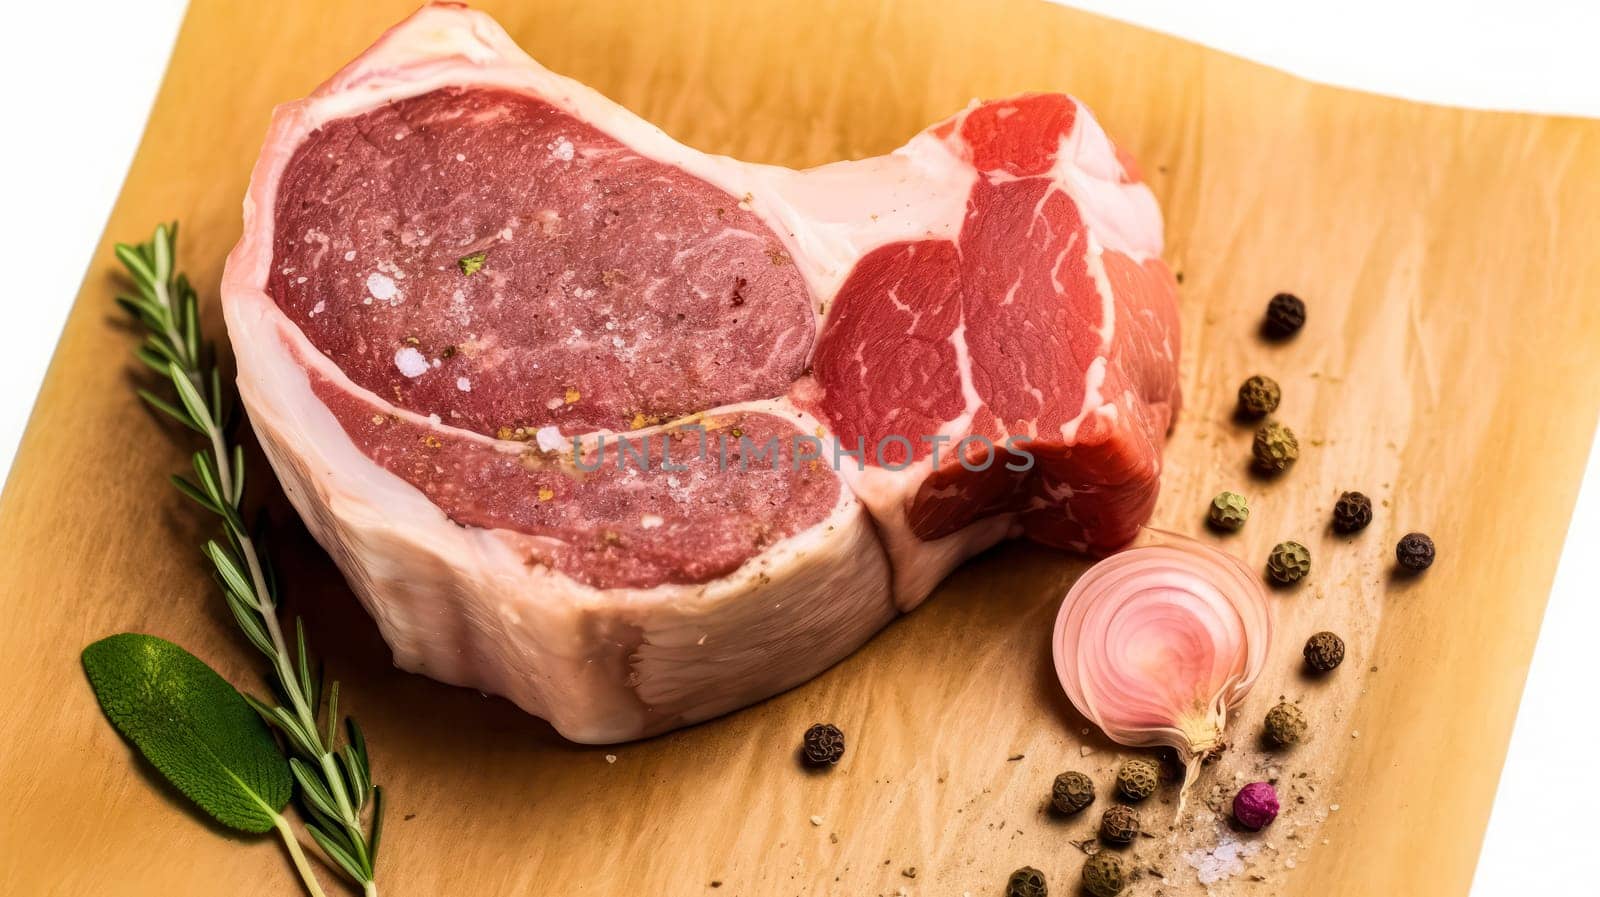 A large piece of meat is displayed on a brown paper with herbs and spices. The meat is cut into a wedge shape, and the herbs and spices are scattered around it. Concept of freshness and naturalness